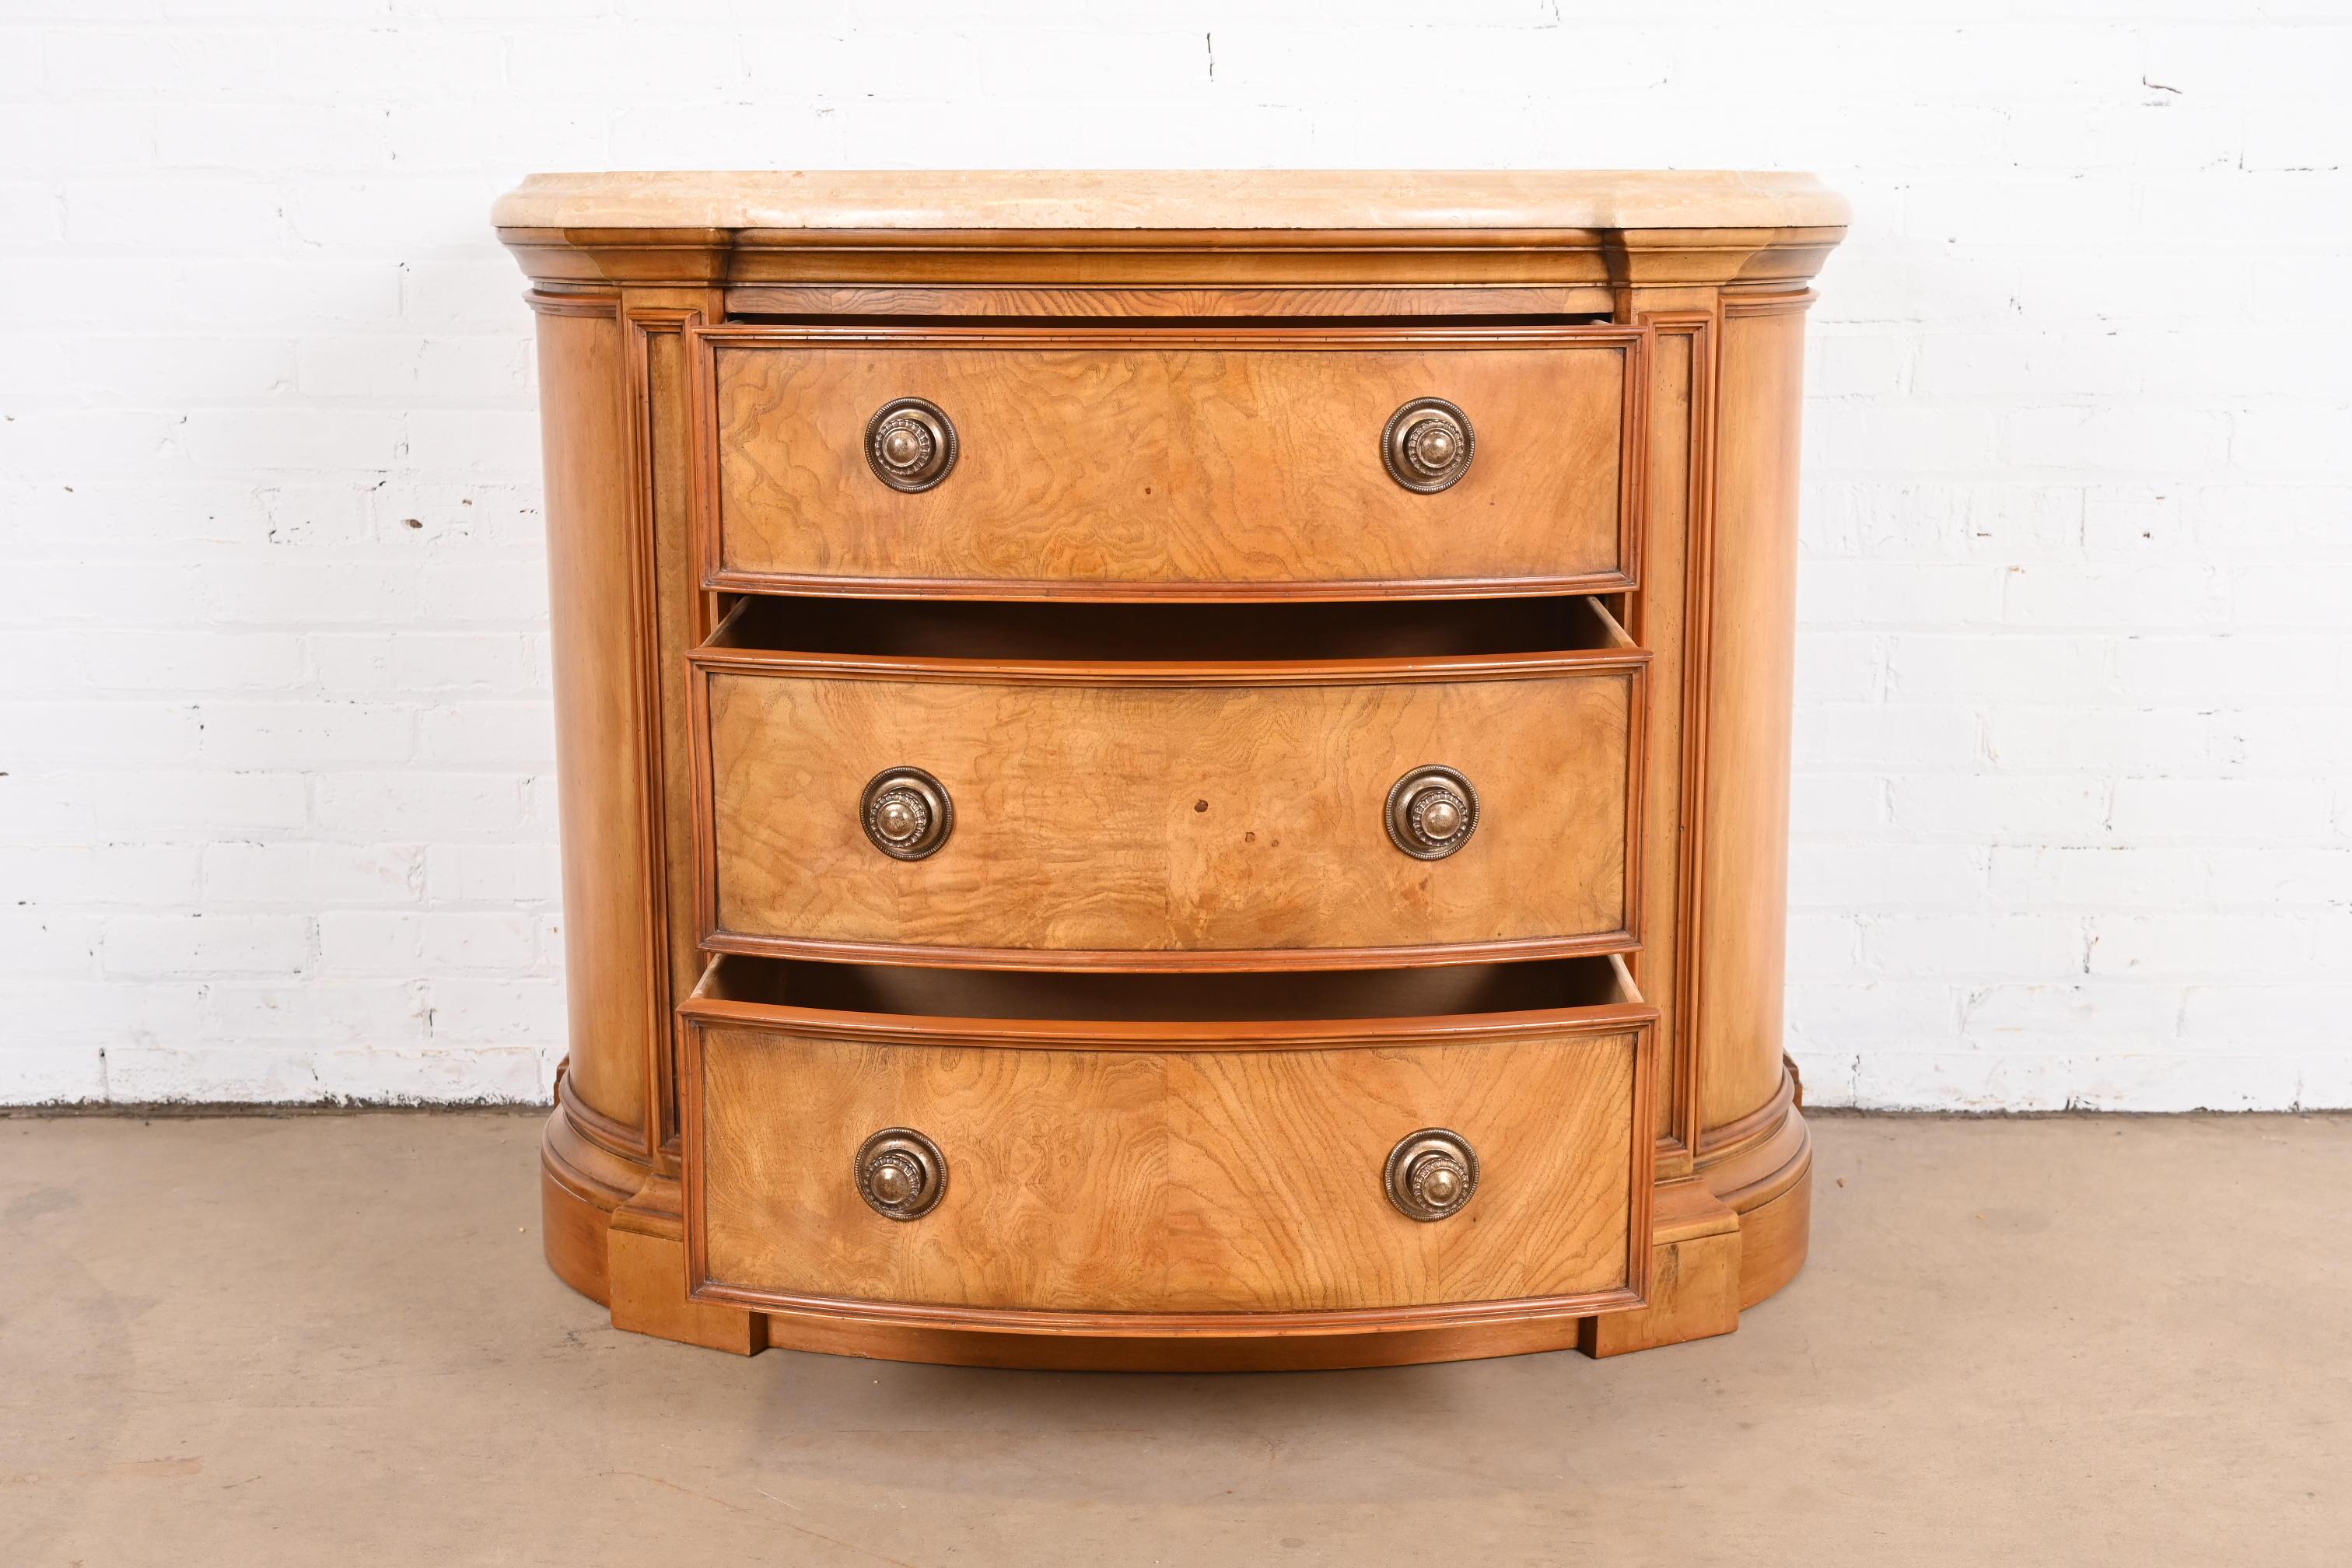 20th Century Henredon Burl Wood Regency Marble Top Demilune Commode or Chest of Drawers For Sale